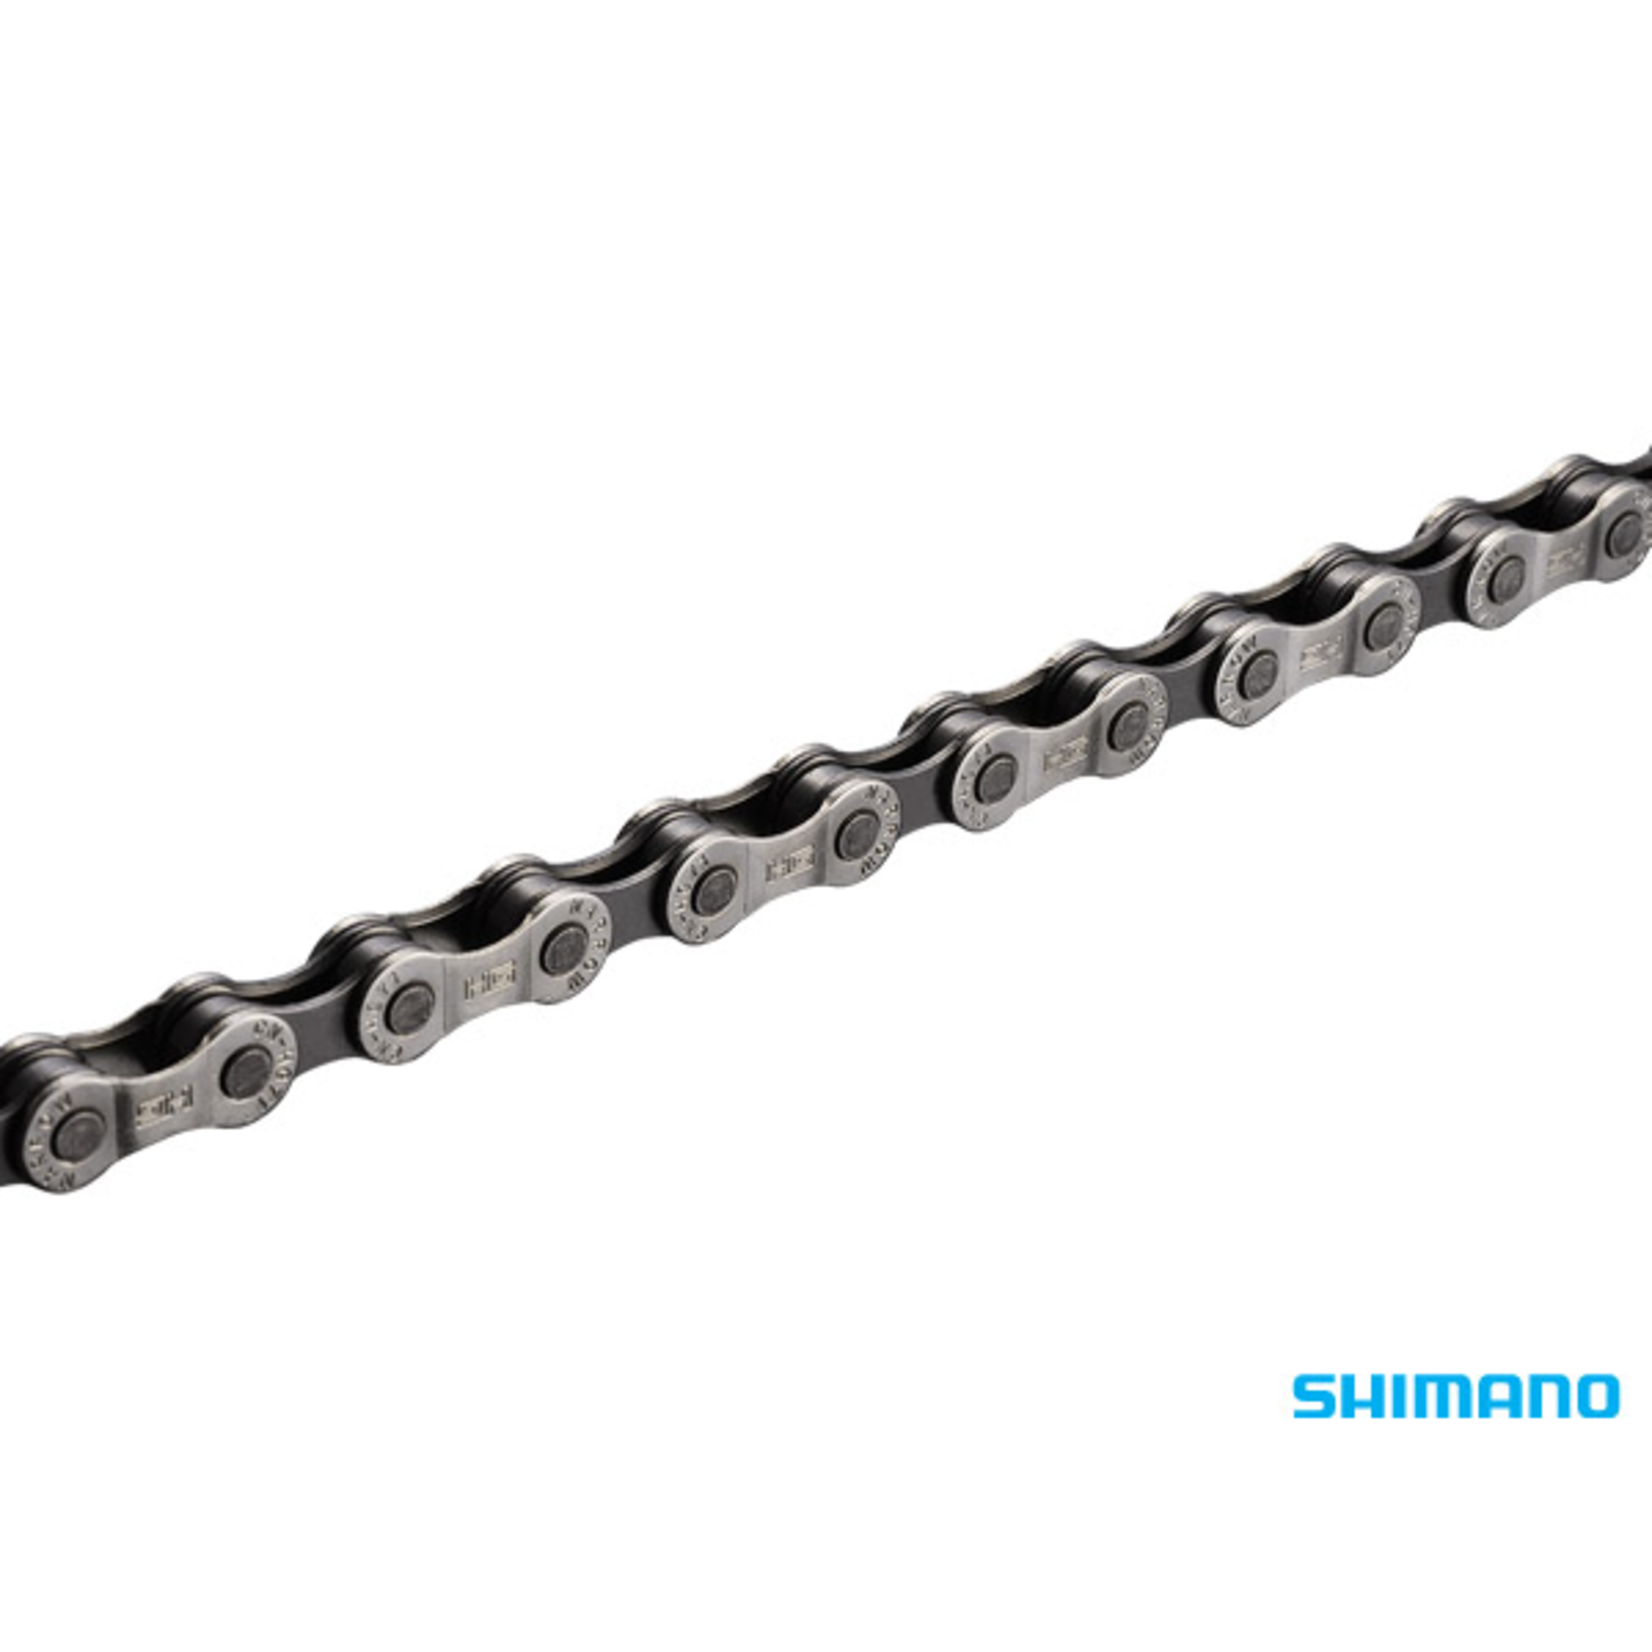 Shimano CN-M8100 CHAIN 12-SPEED XT w/QUICK LINK 126 LINKS